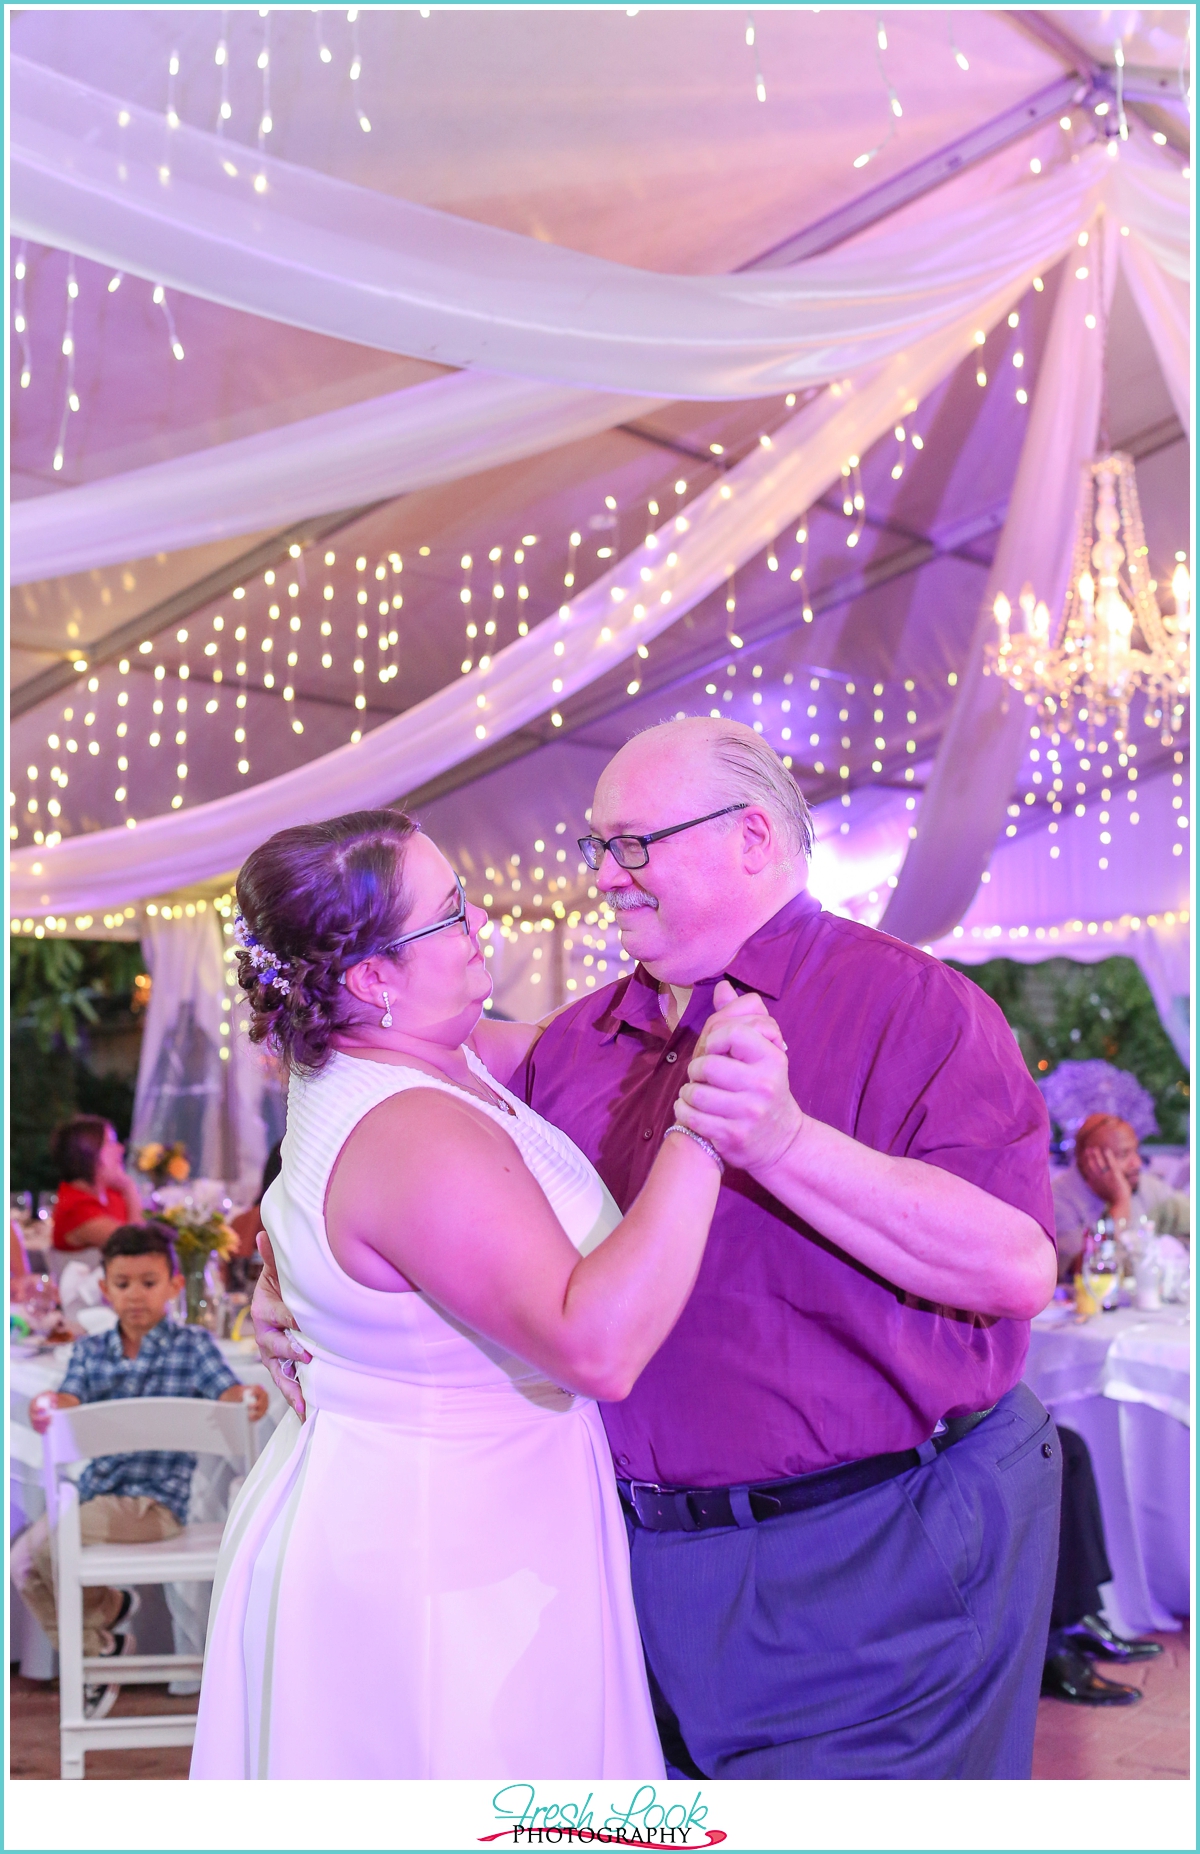 dancing with daddy at the wedding